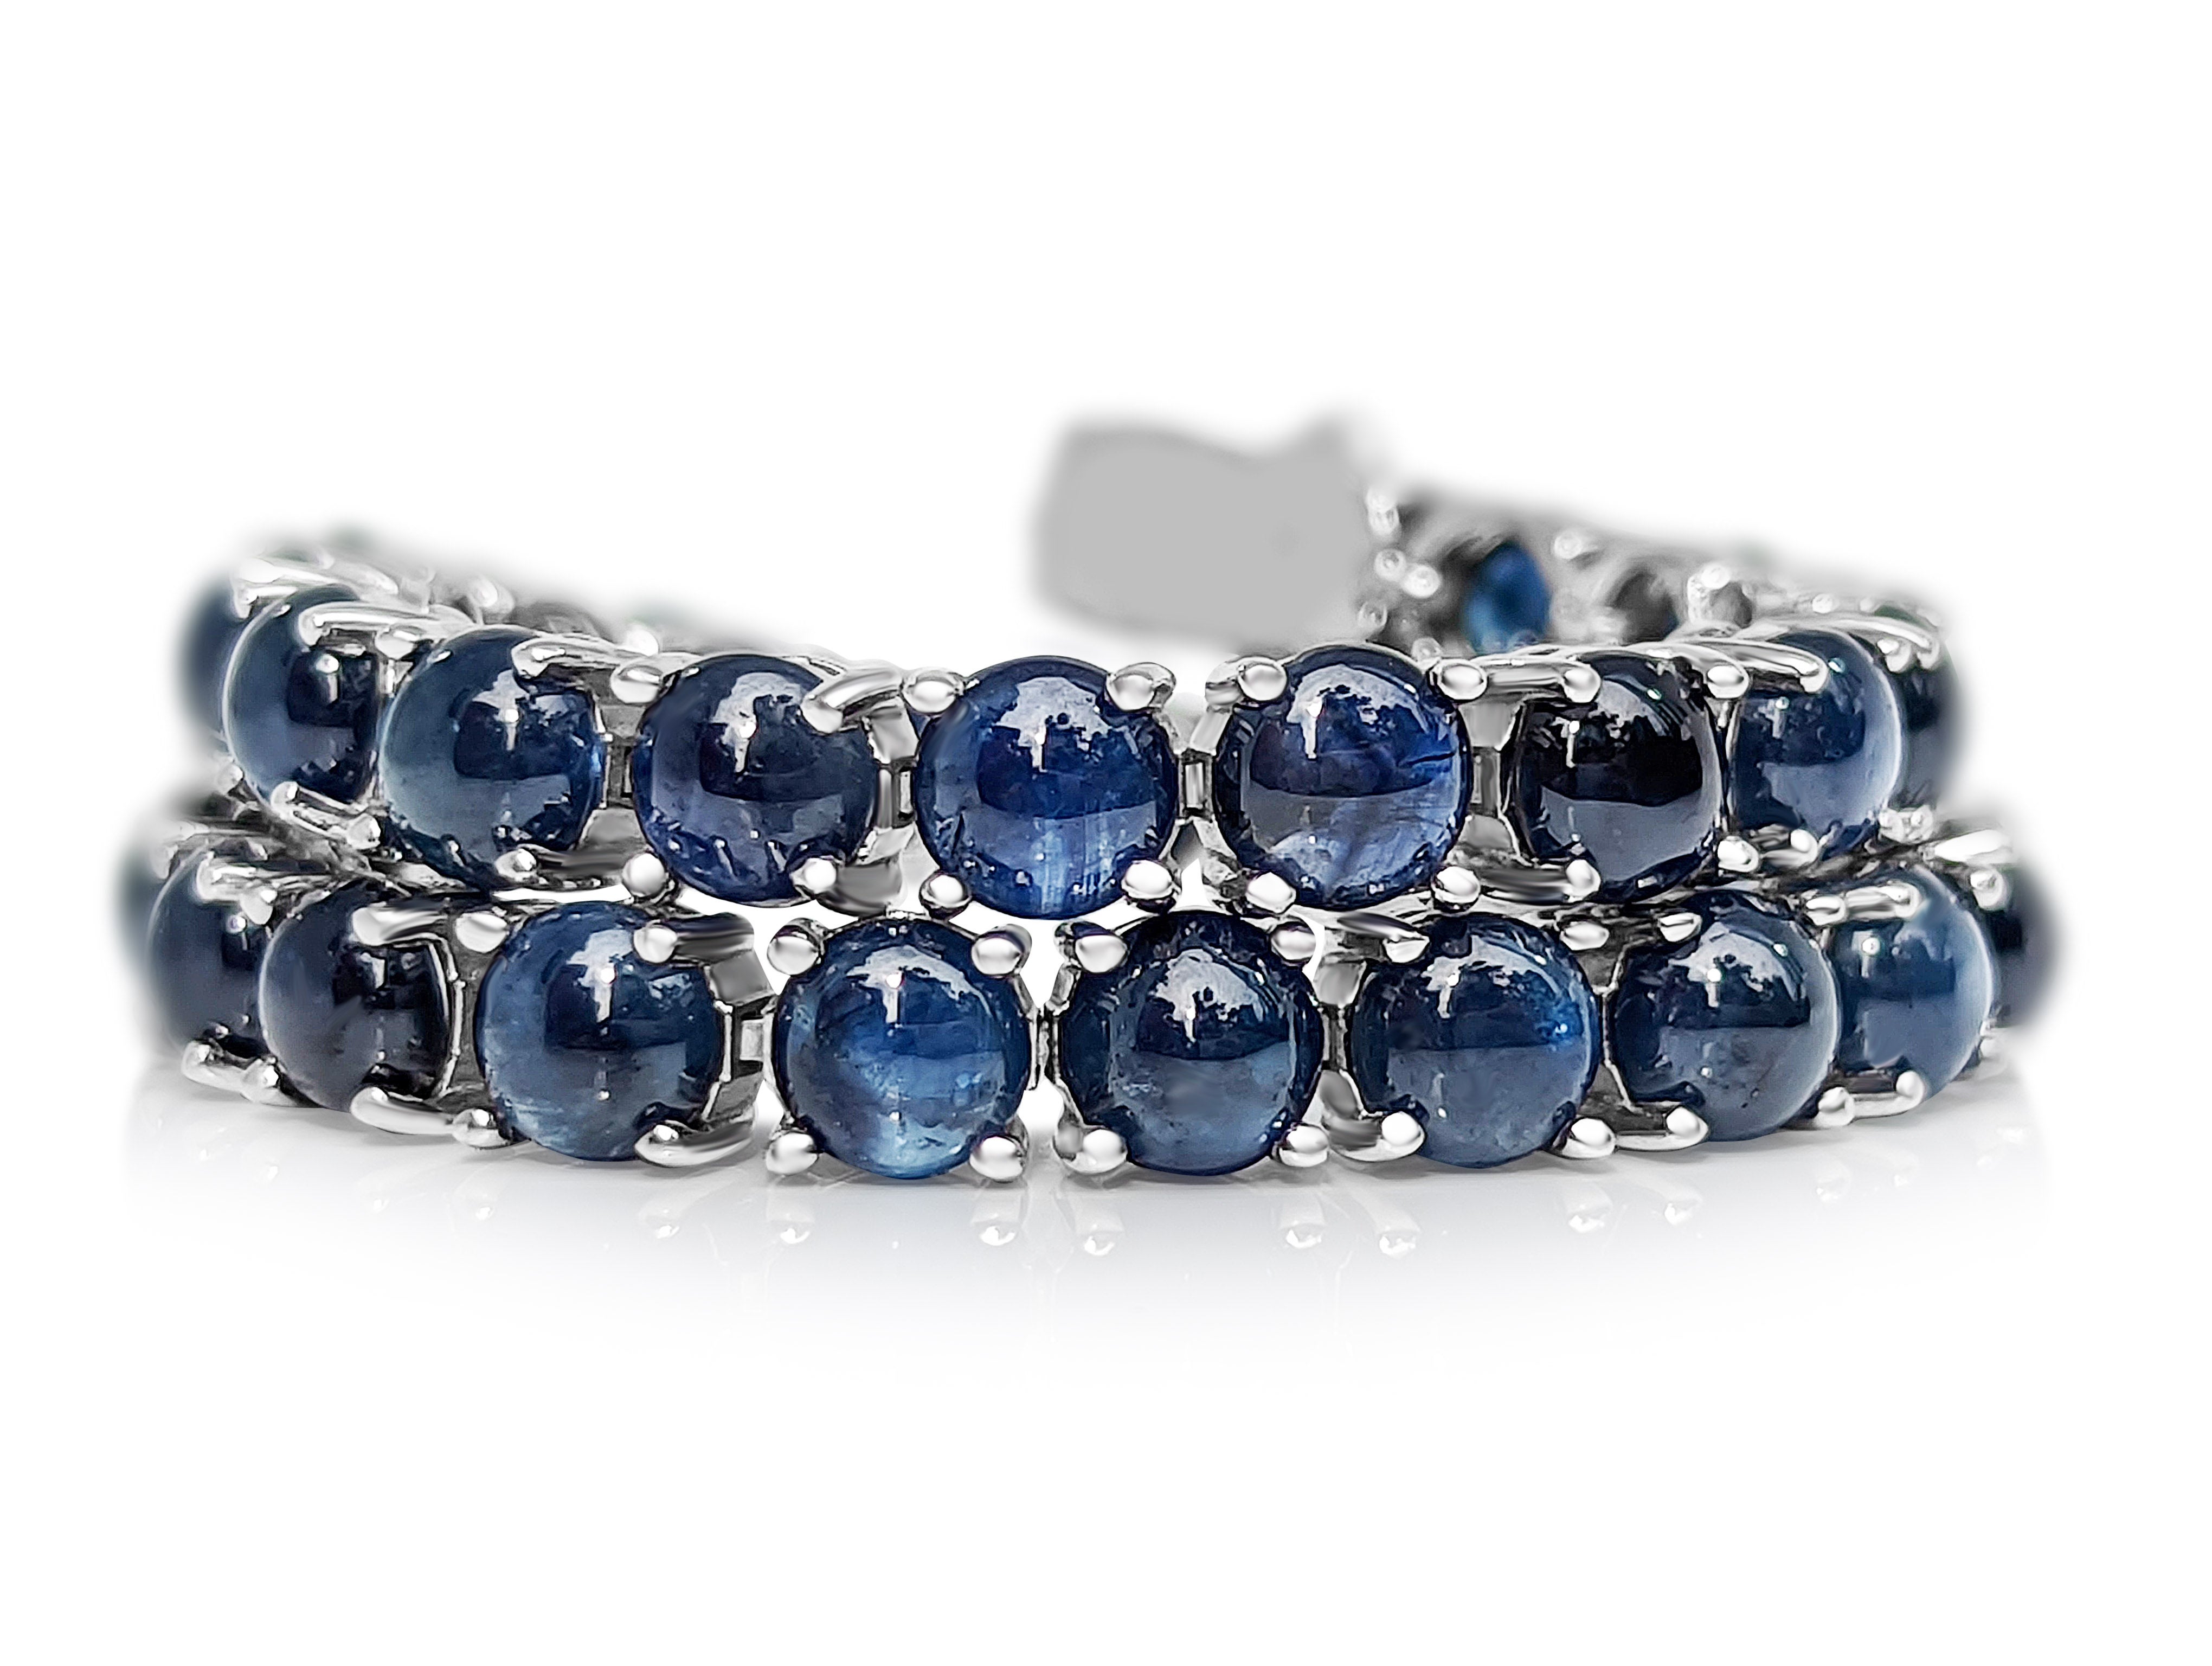 A truly one of a kind natural sapphire bracelet, set with 34 round cabochon total carat weight!
The bracelet will stand out in any occasion and is a wonderful gift for yourself or your loved one.

Center Natural Sapphires:
Weight: 22.30 ct, 34